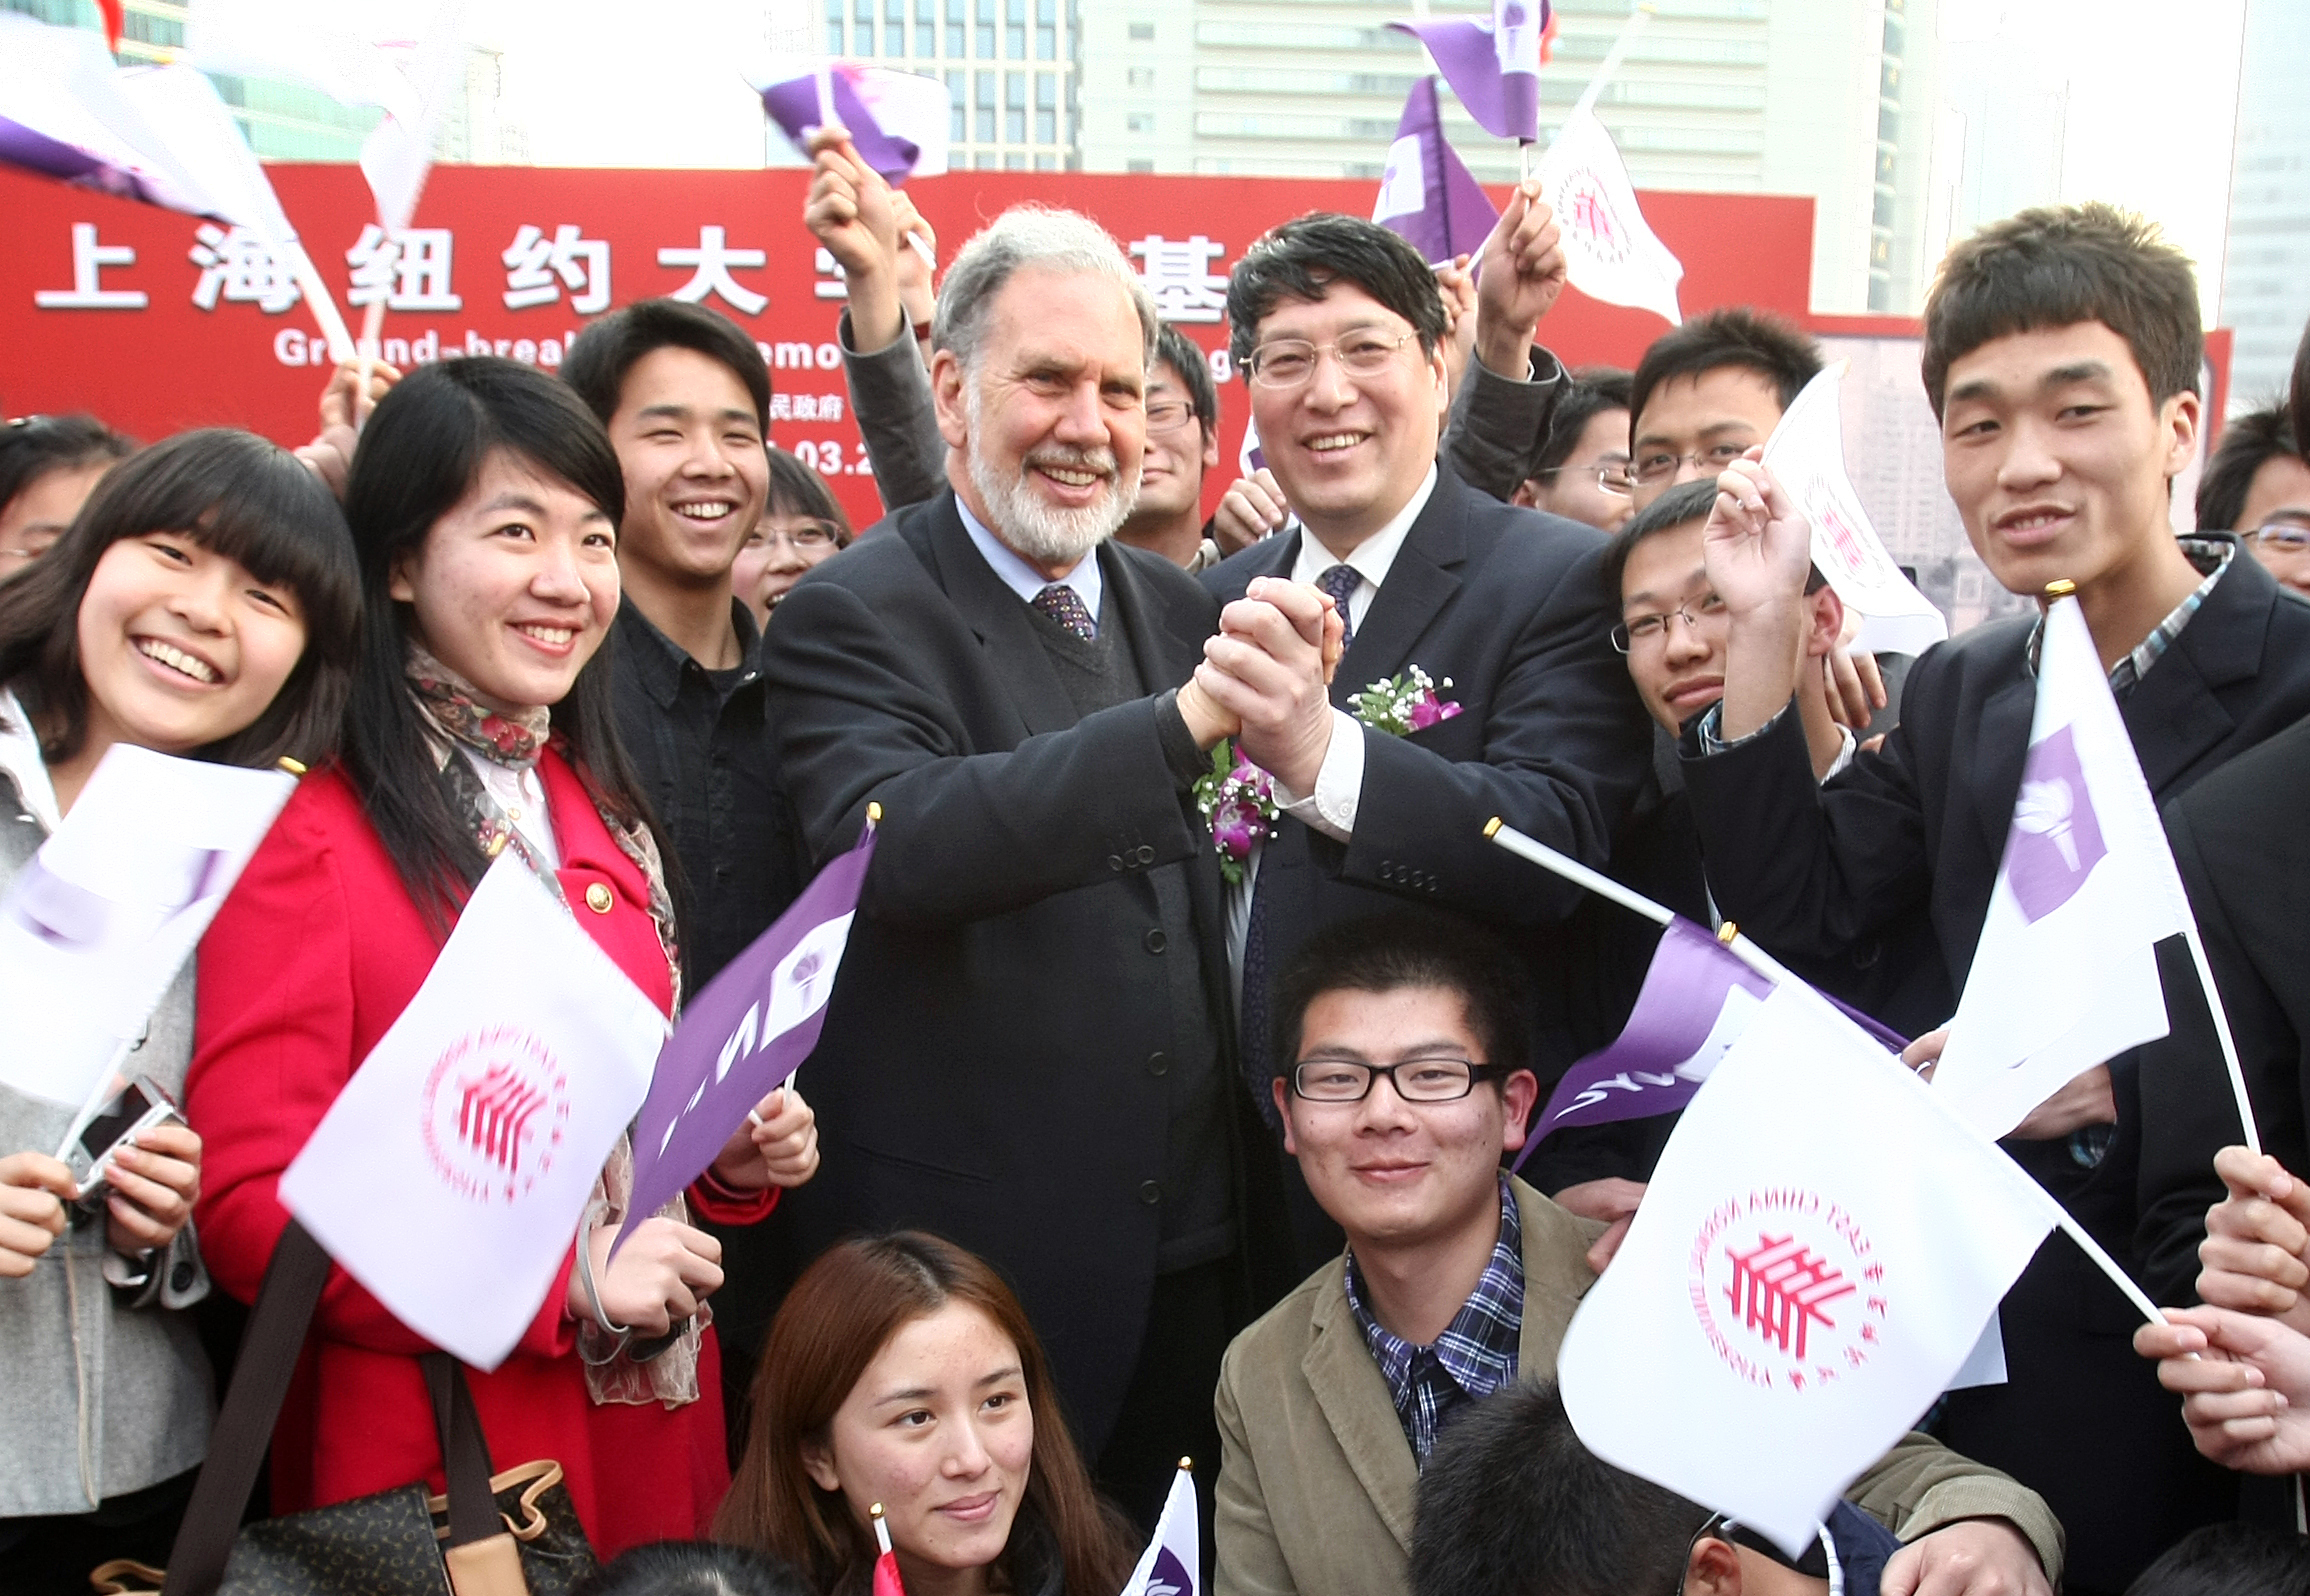 Sexton and Yu clasp hands surrounded by students waving NYU and ECNU flags